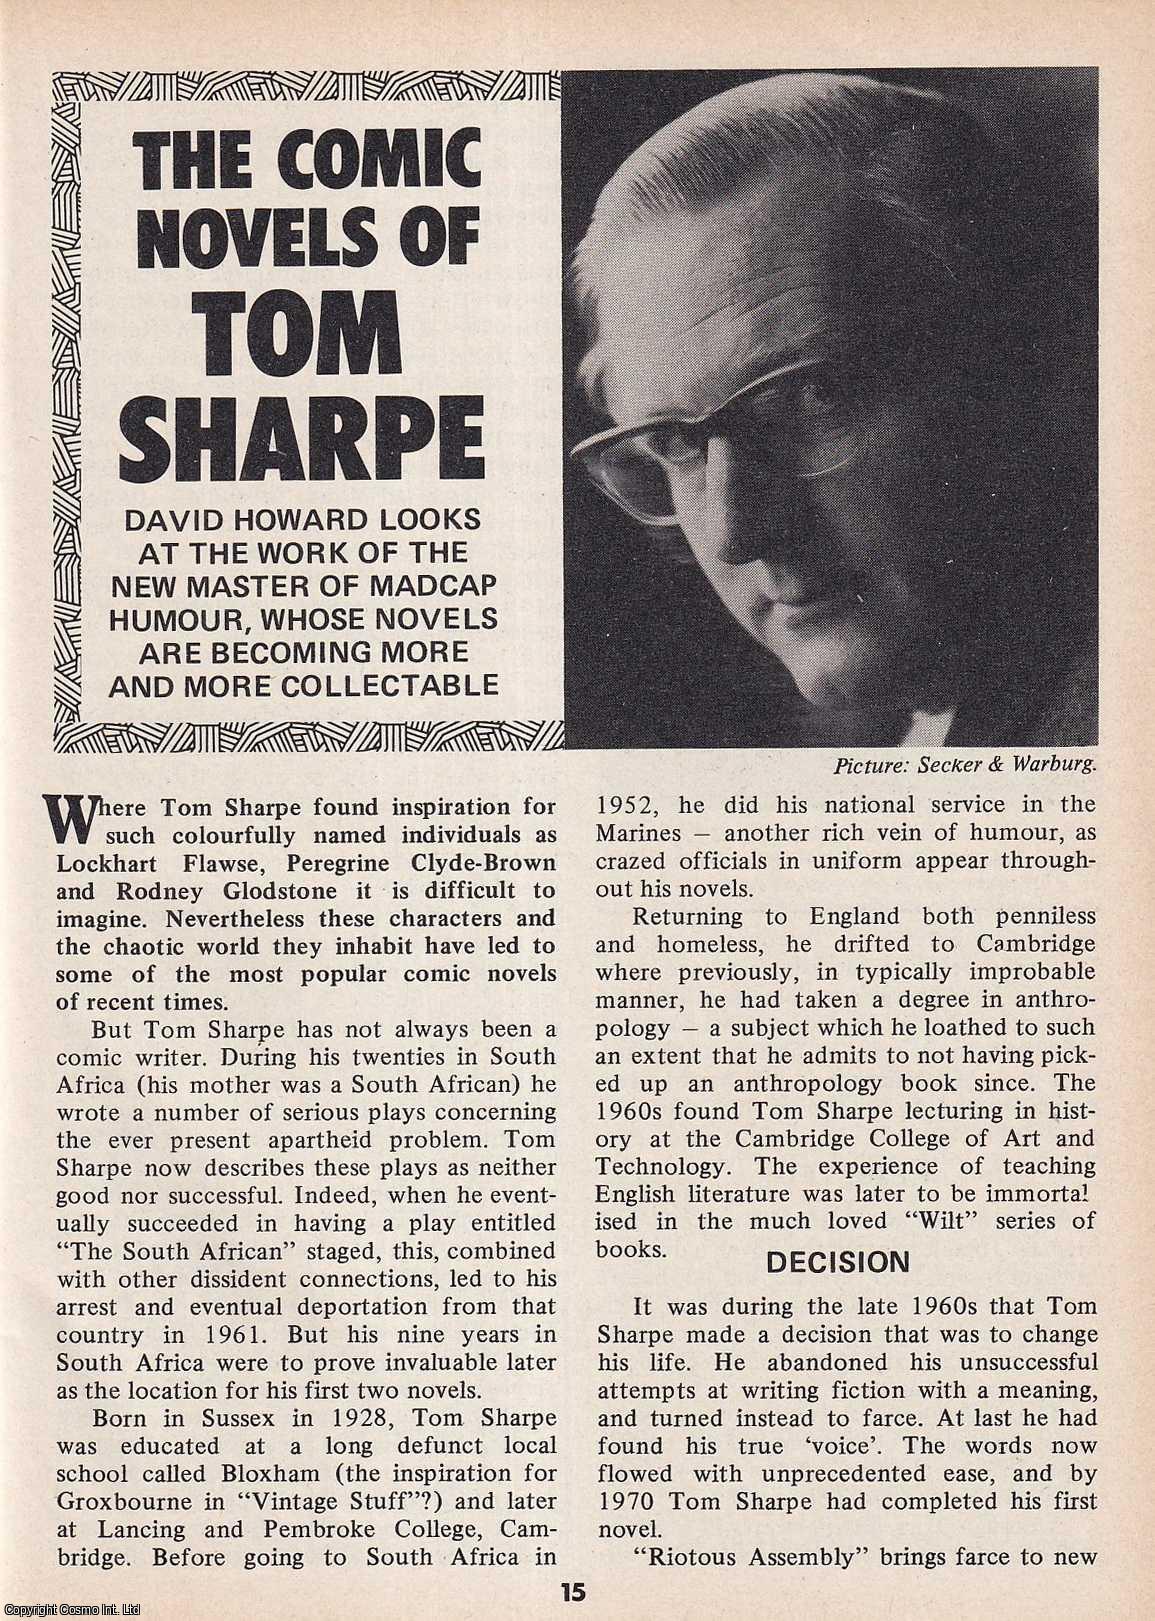 David Howard - The Comic Novels of Tom Sharpe. The Work of The New Master of Madcap Humour. This is an original article separated from an issue of The Book & Magazine Collector publication.